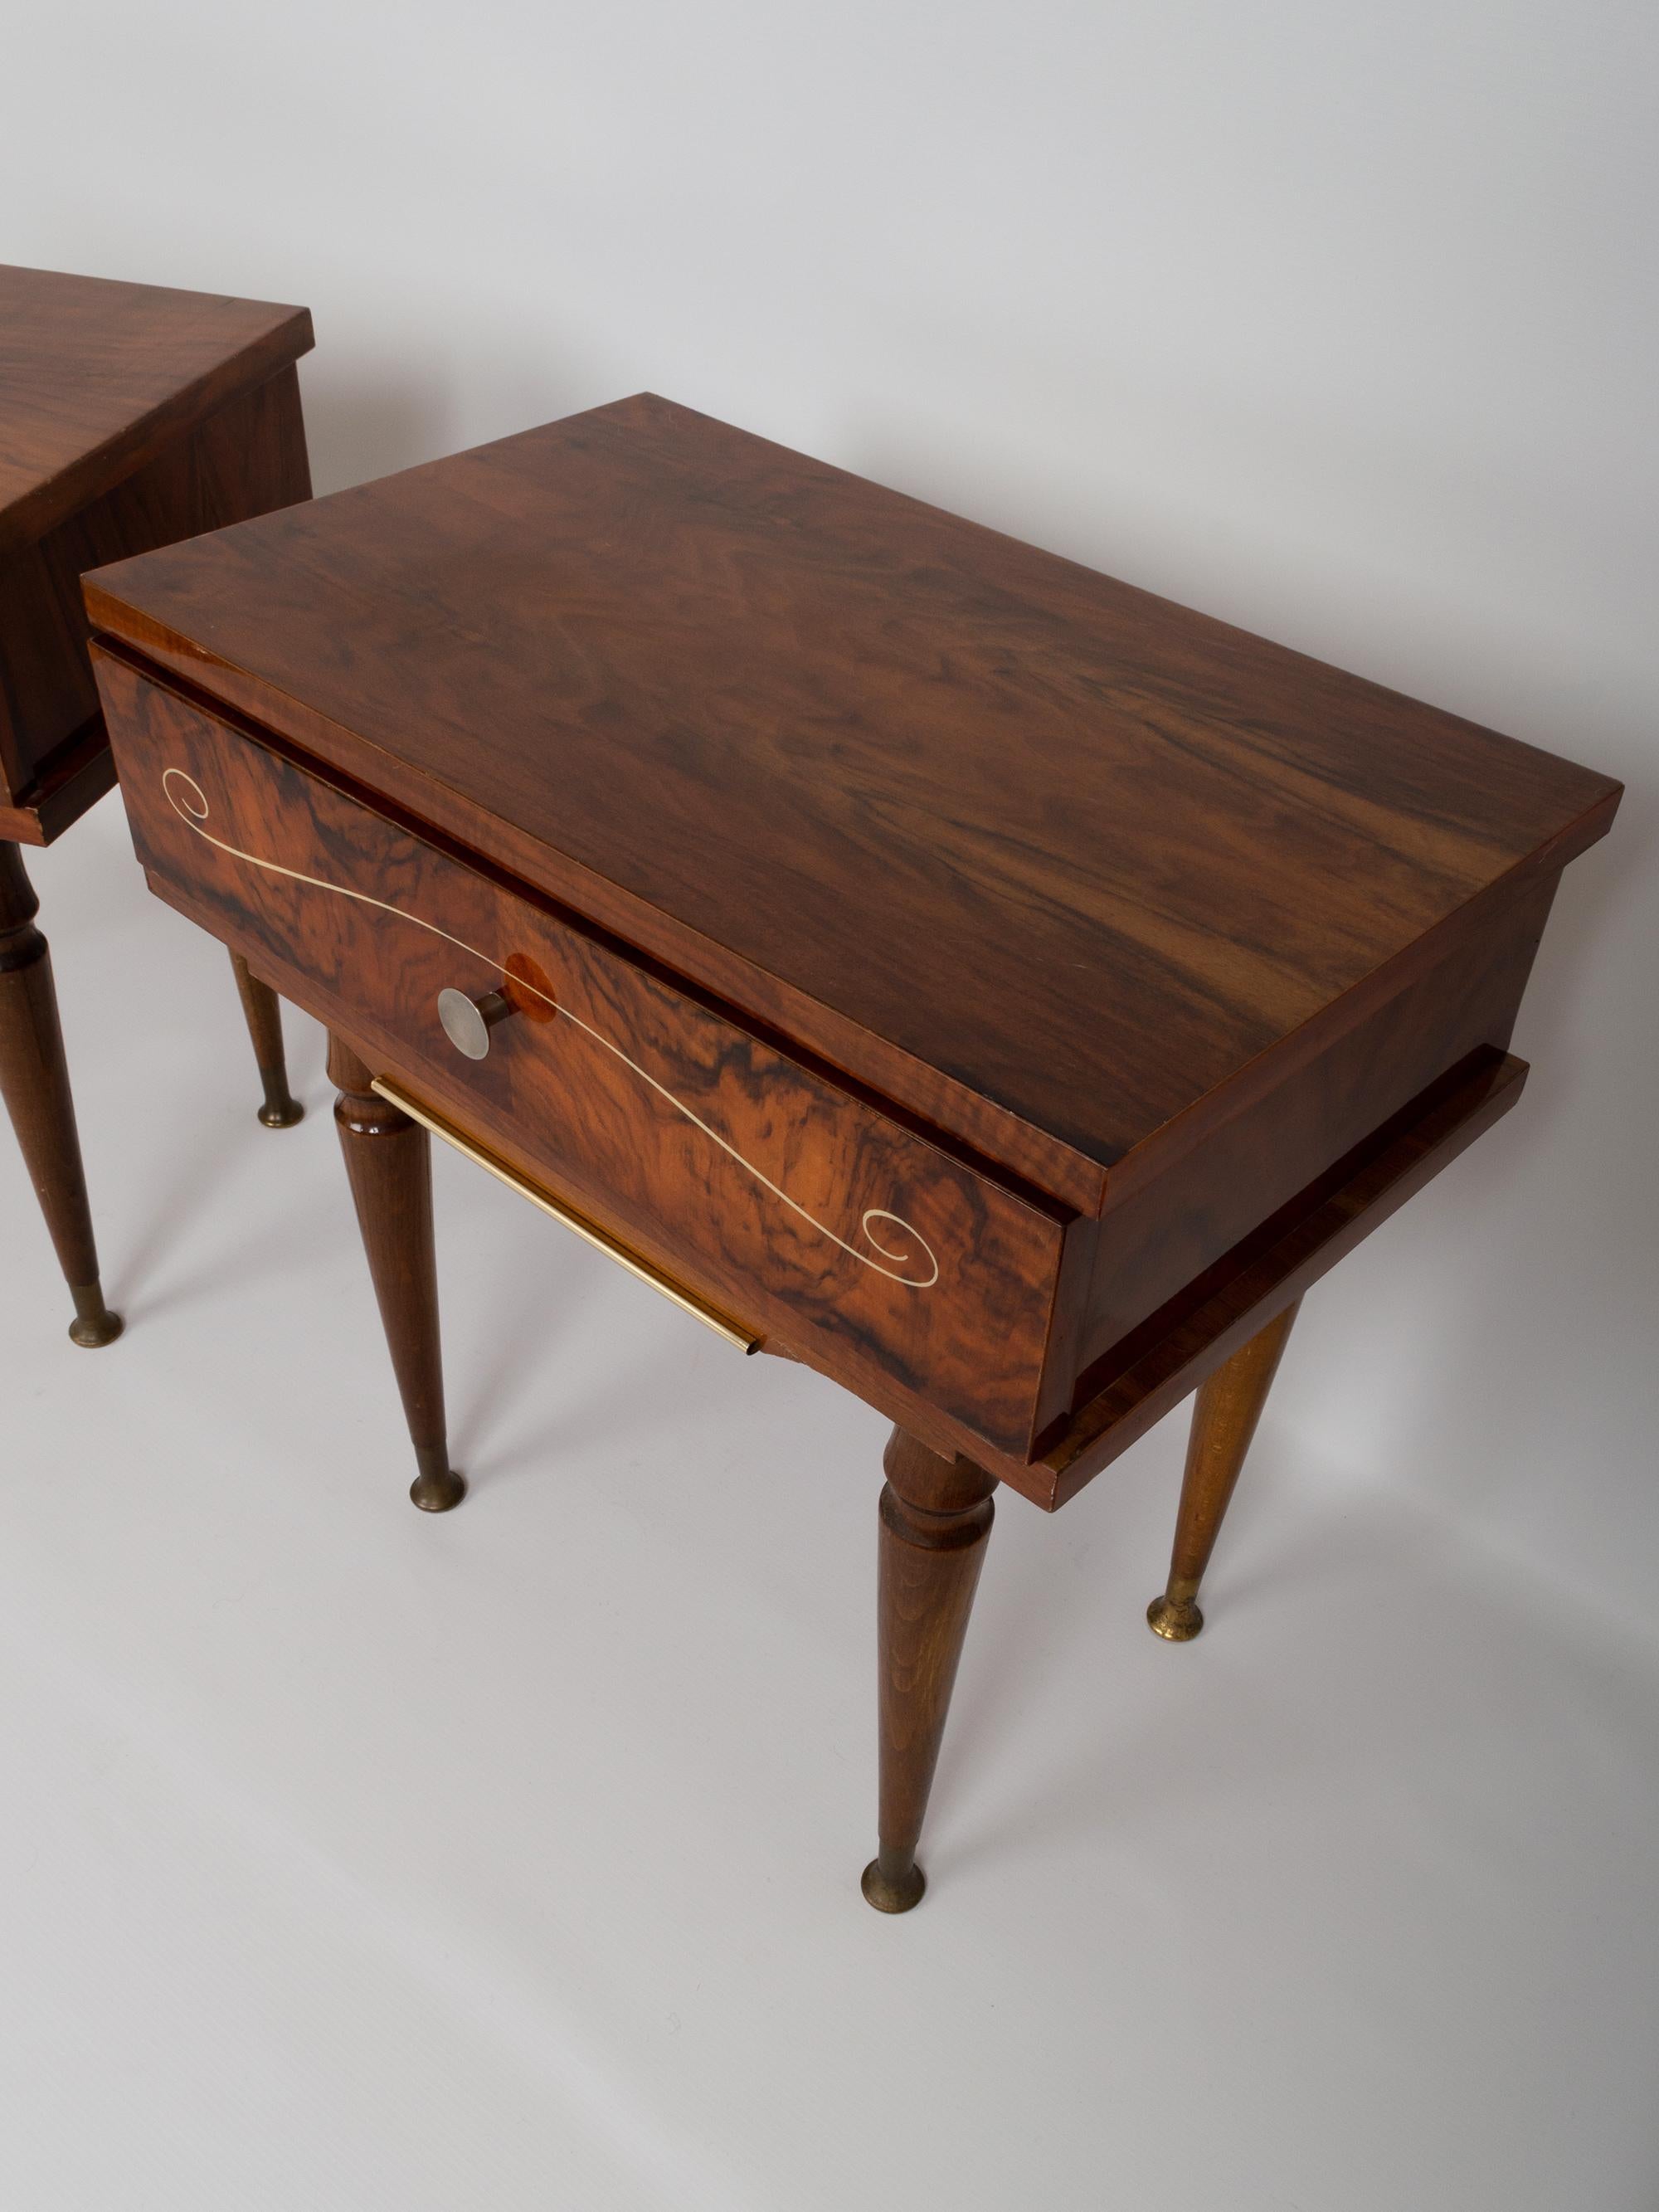 Pair of French Art Deco Figured Walnut Nightstands Bedside Cabinets, circa 1960 For Sale 2